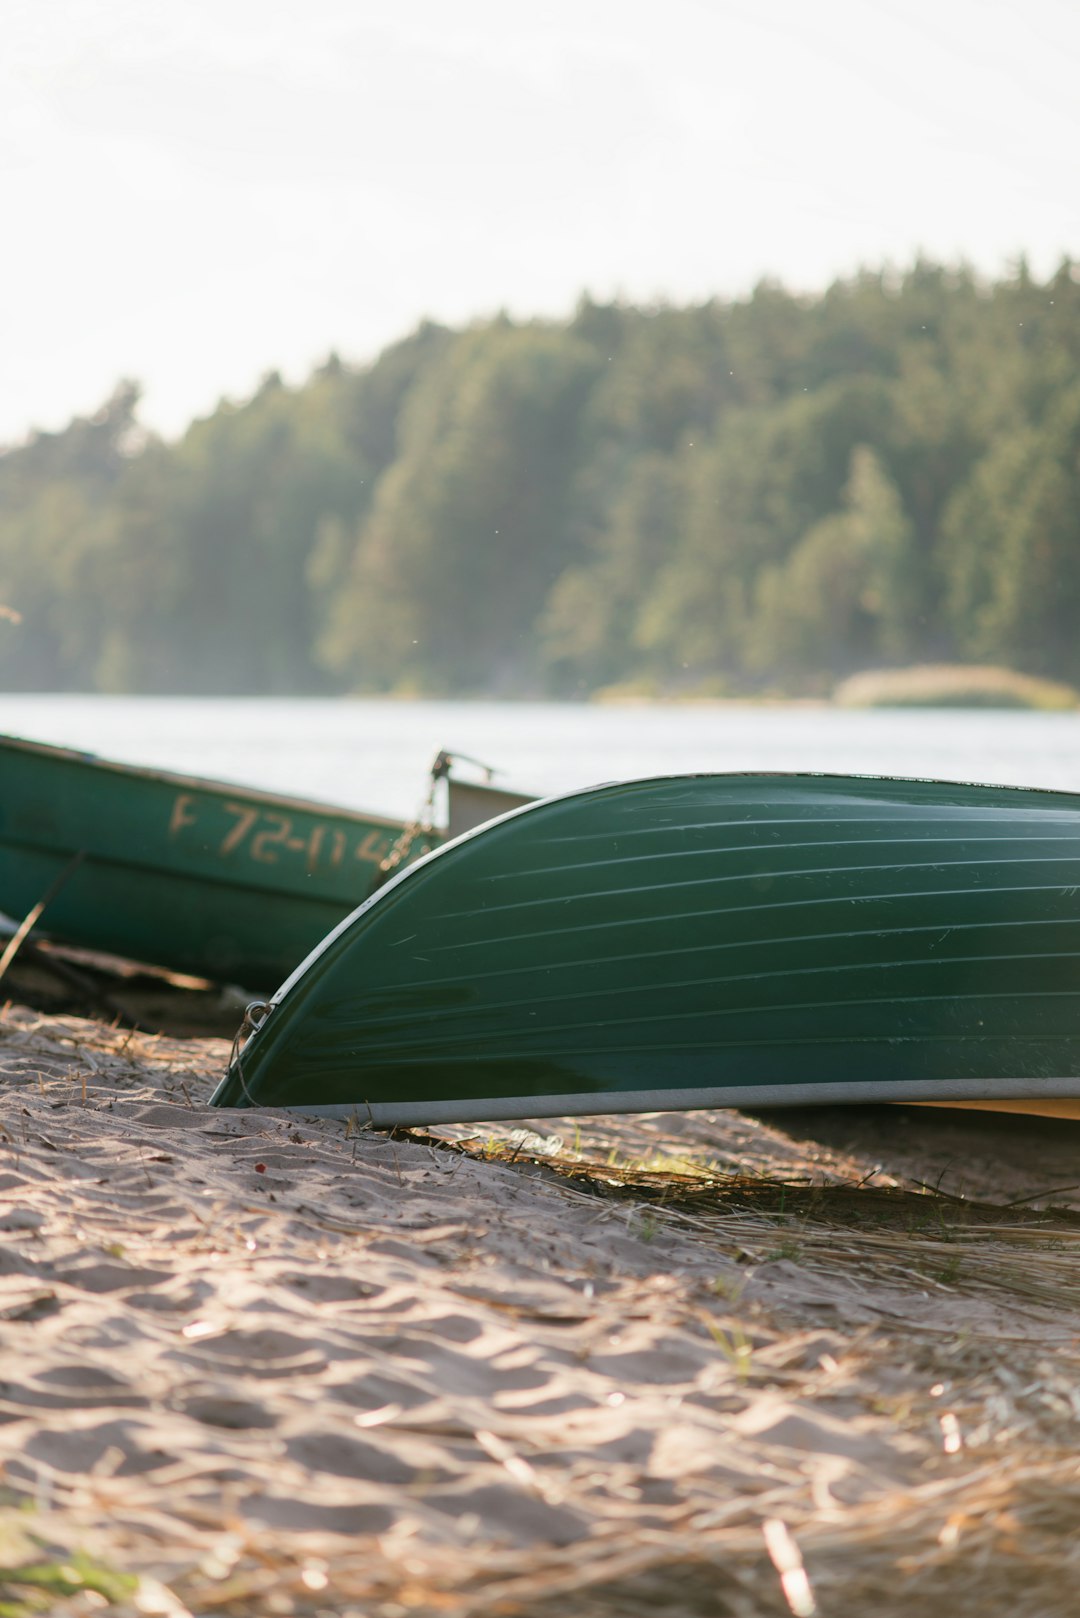 green boat on brown sand near body of water during daytime